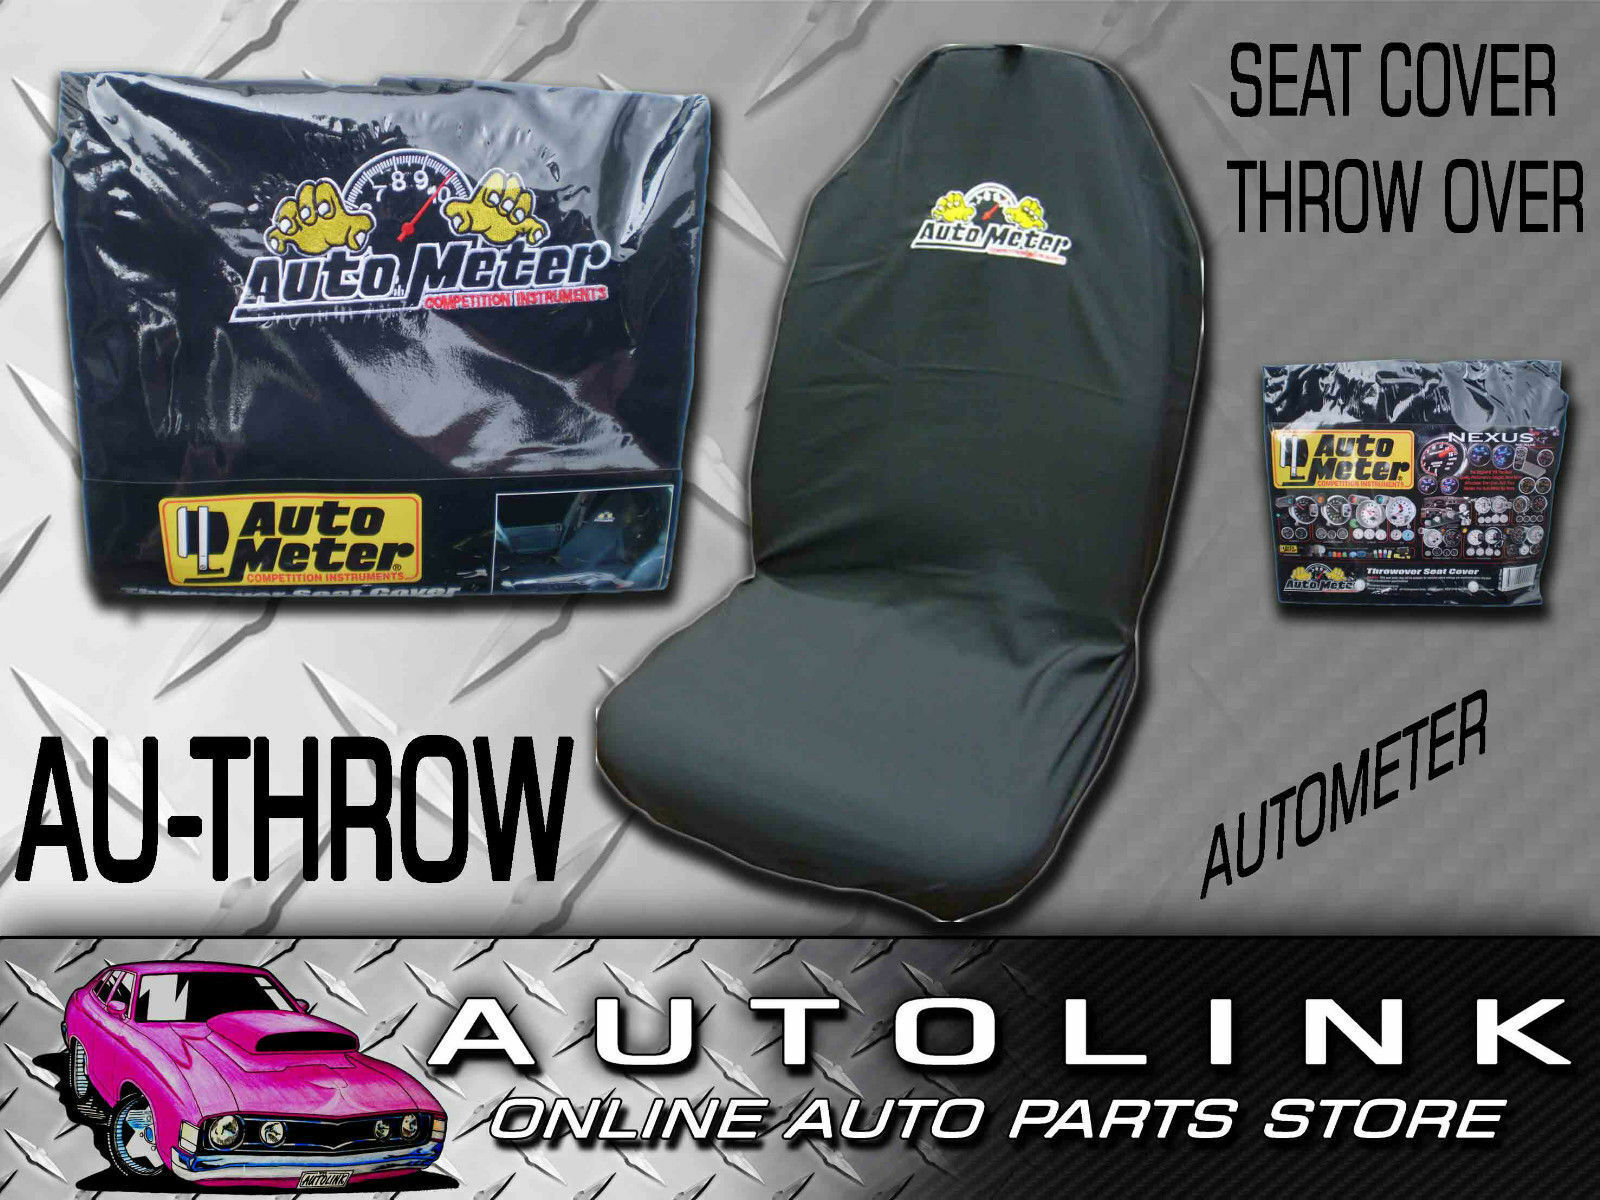 AUTOMETER THROWOVER SEAT COVER W/ LOGO BUCKET SEATS FOR HOLDEN CALAIS COMMODORE